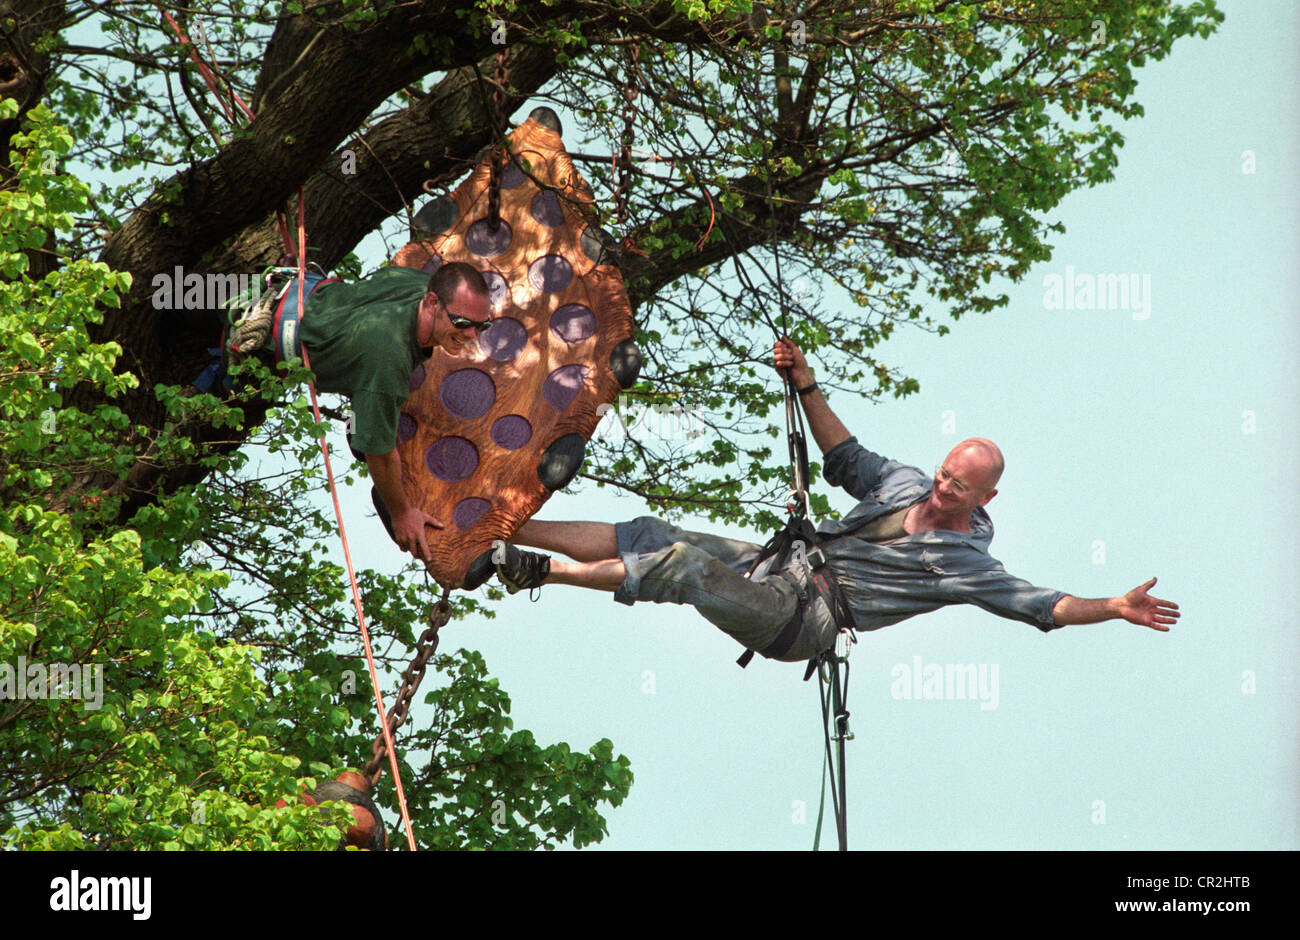 Two abseiling tree surgeons hang from their harnesses while installing a wooden 'Tree Kite' sculpture as part of Brighton festival. Stock Photo